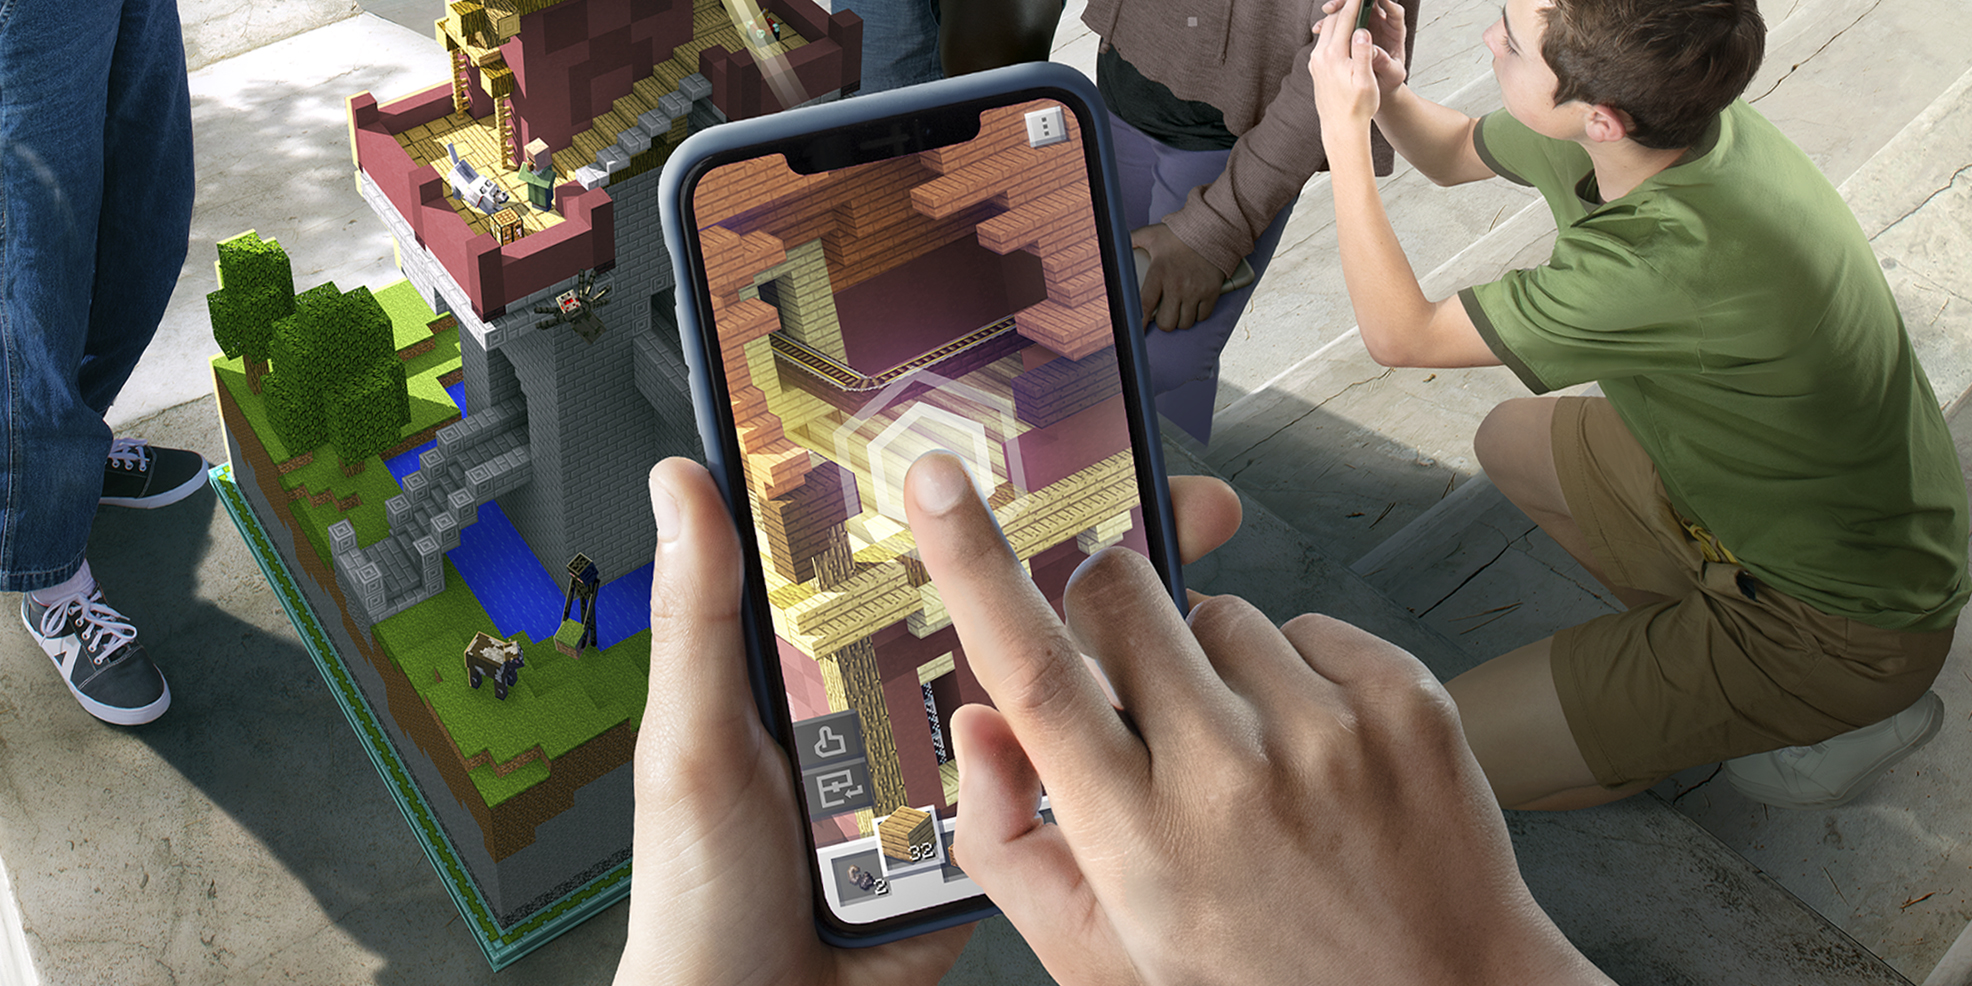 Minecraft Earth gets first live demo, coming to iOS “this summer